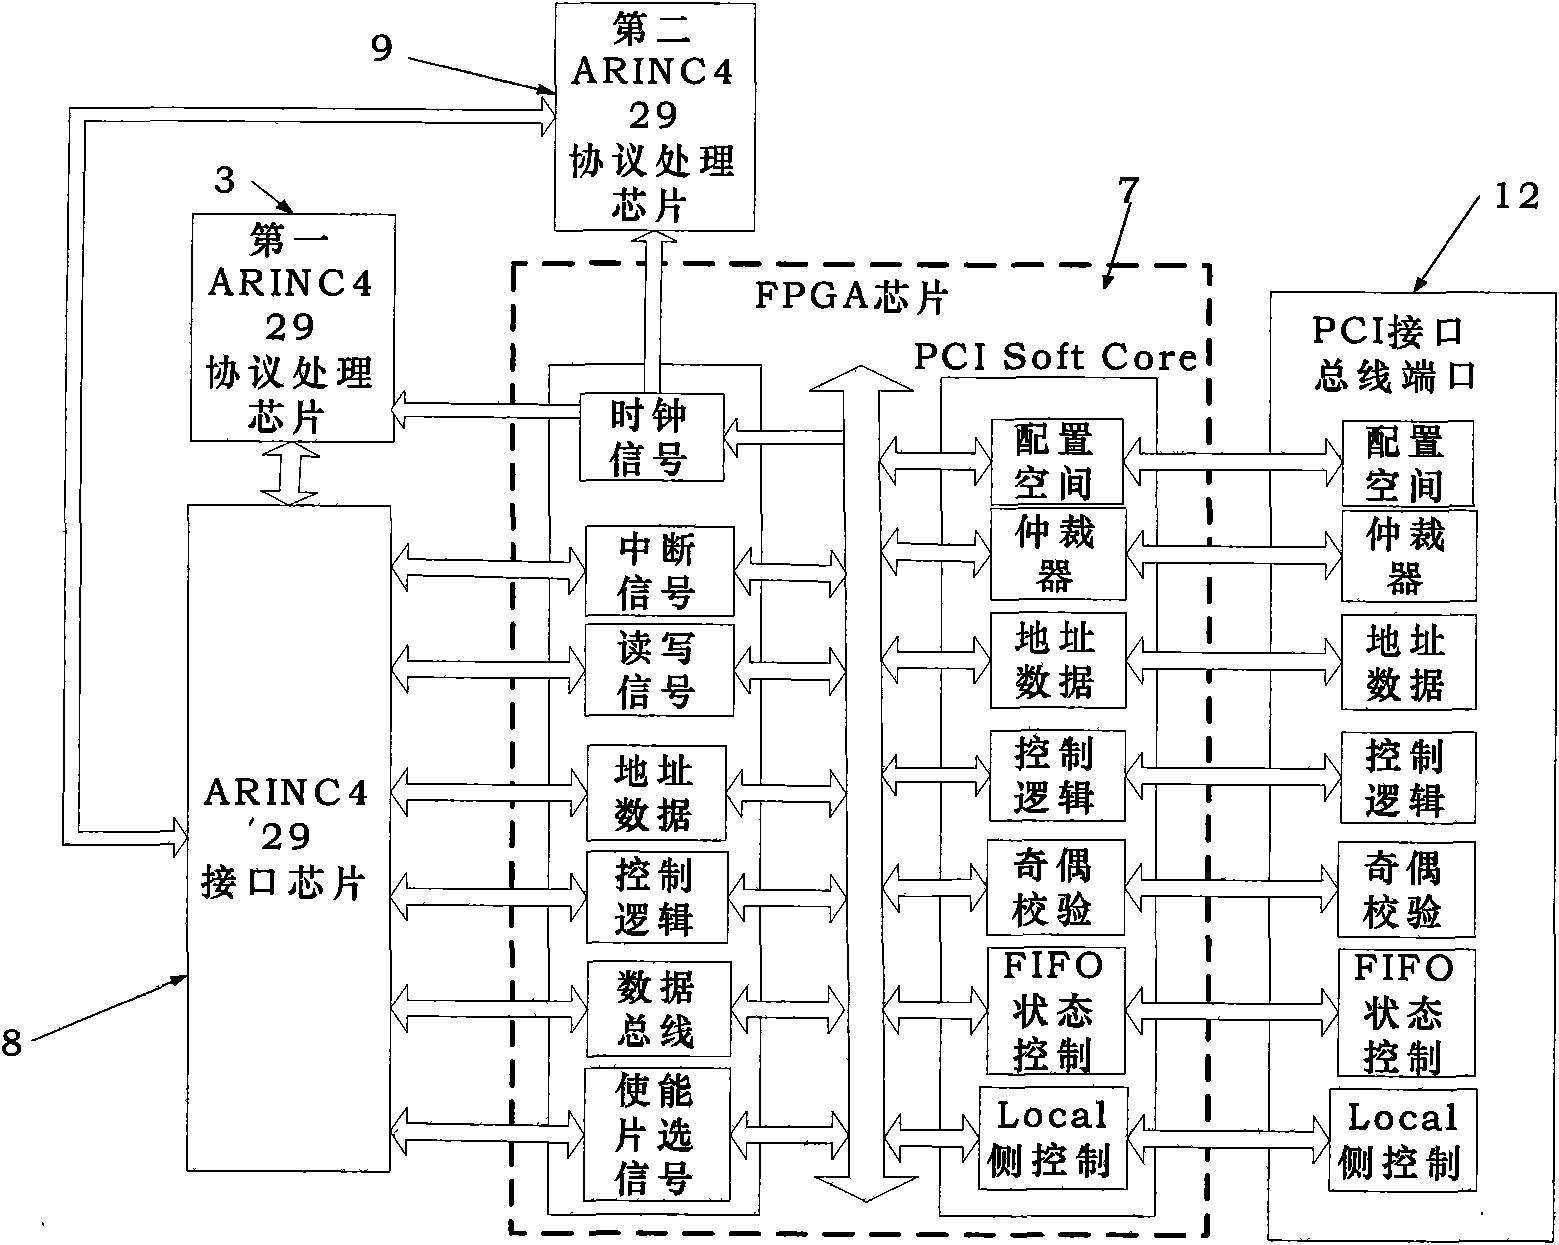 PCI integrated circuit board device used for ARINC429 communication